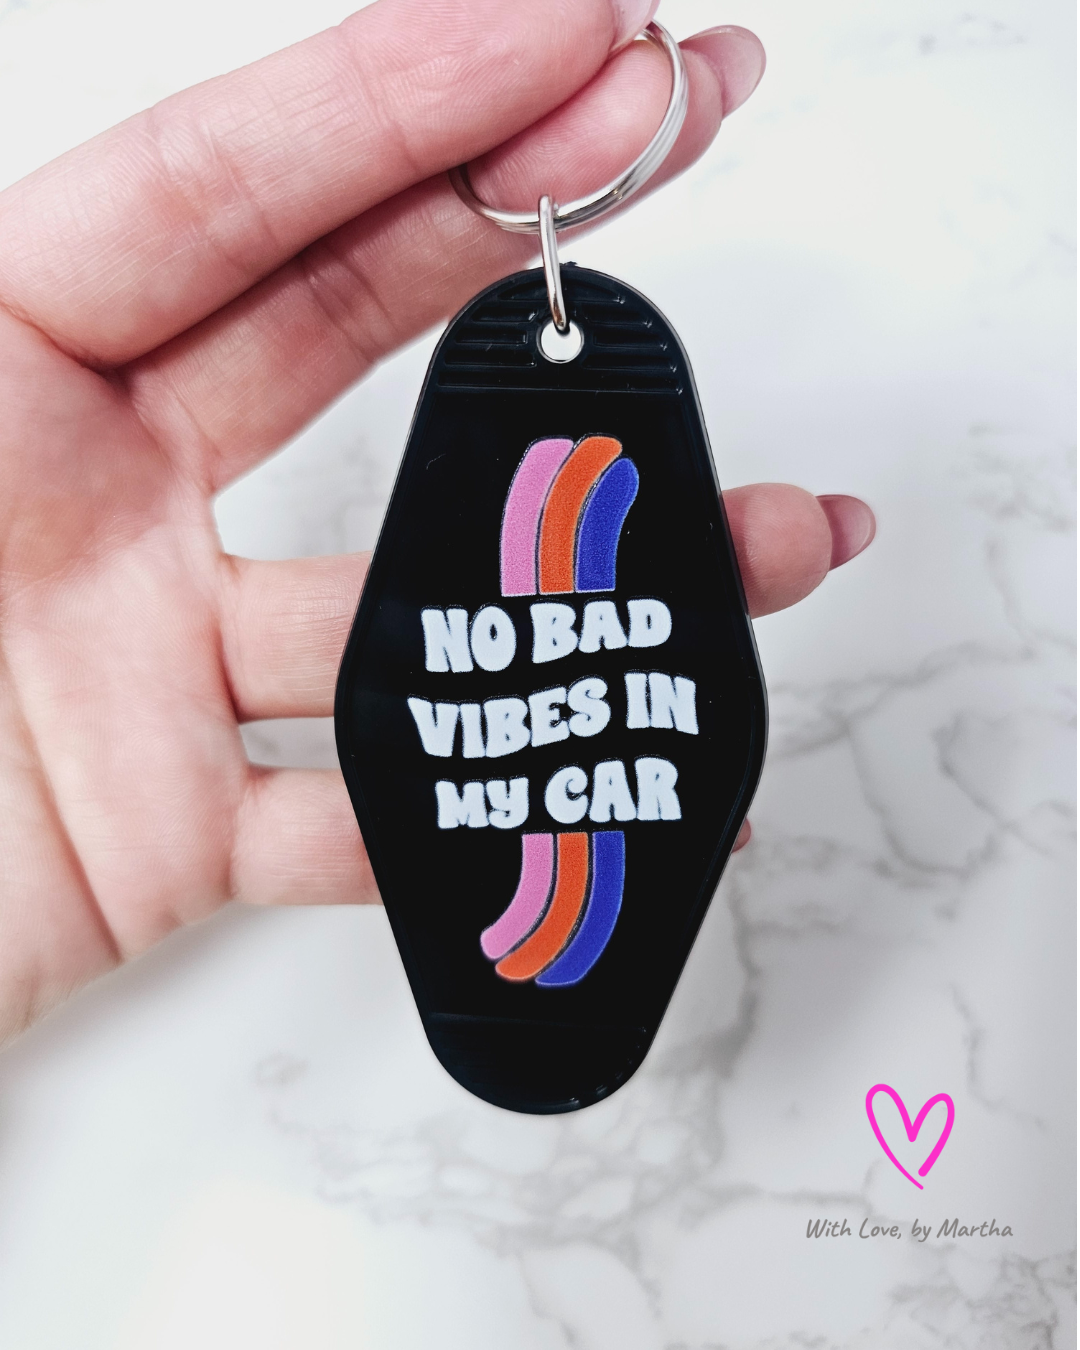 "No bad vibes in my car" Motel style keychains